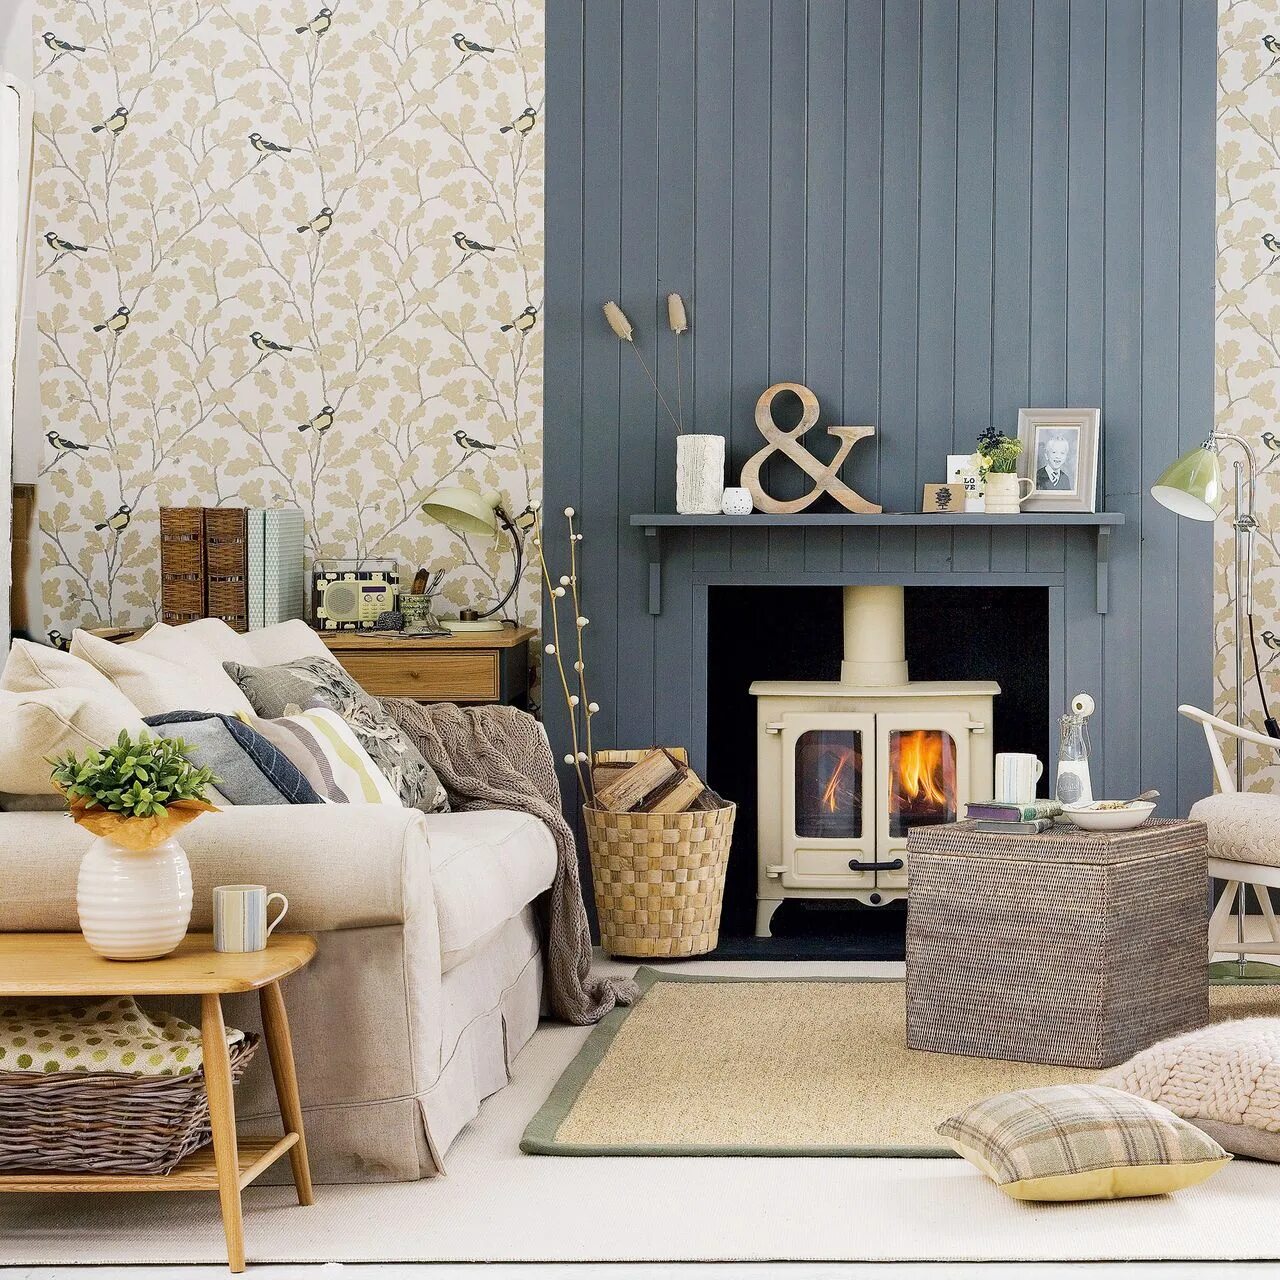 Best country for living. Miller из коллекции Country Living. Ideal Home. Chic Living Room with Chimney.